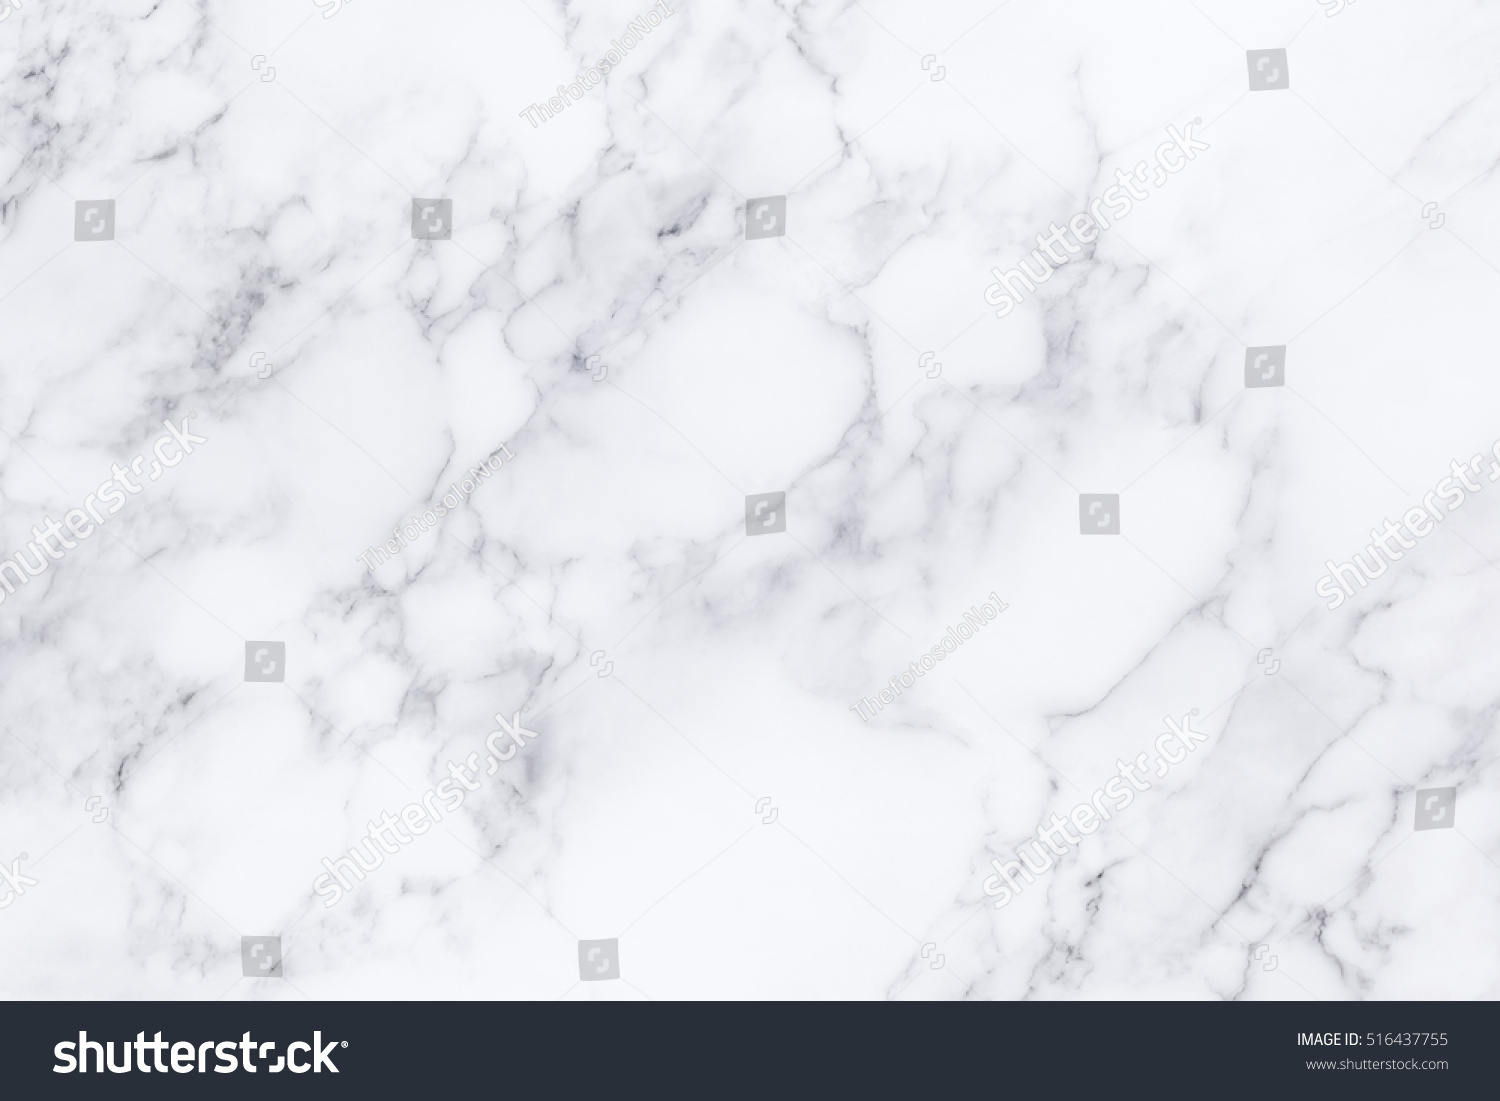 White marble texture and background for design pattern artwork. #516437755